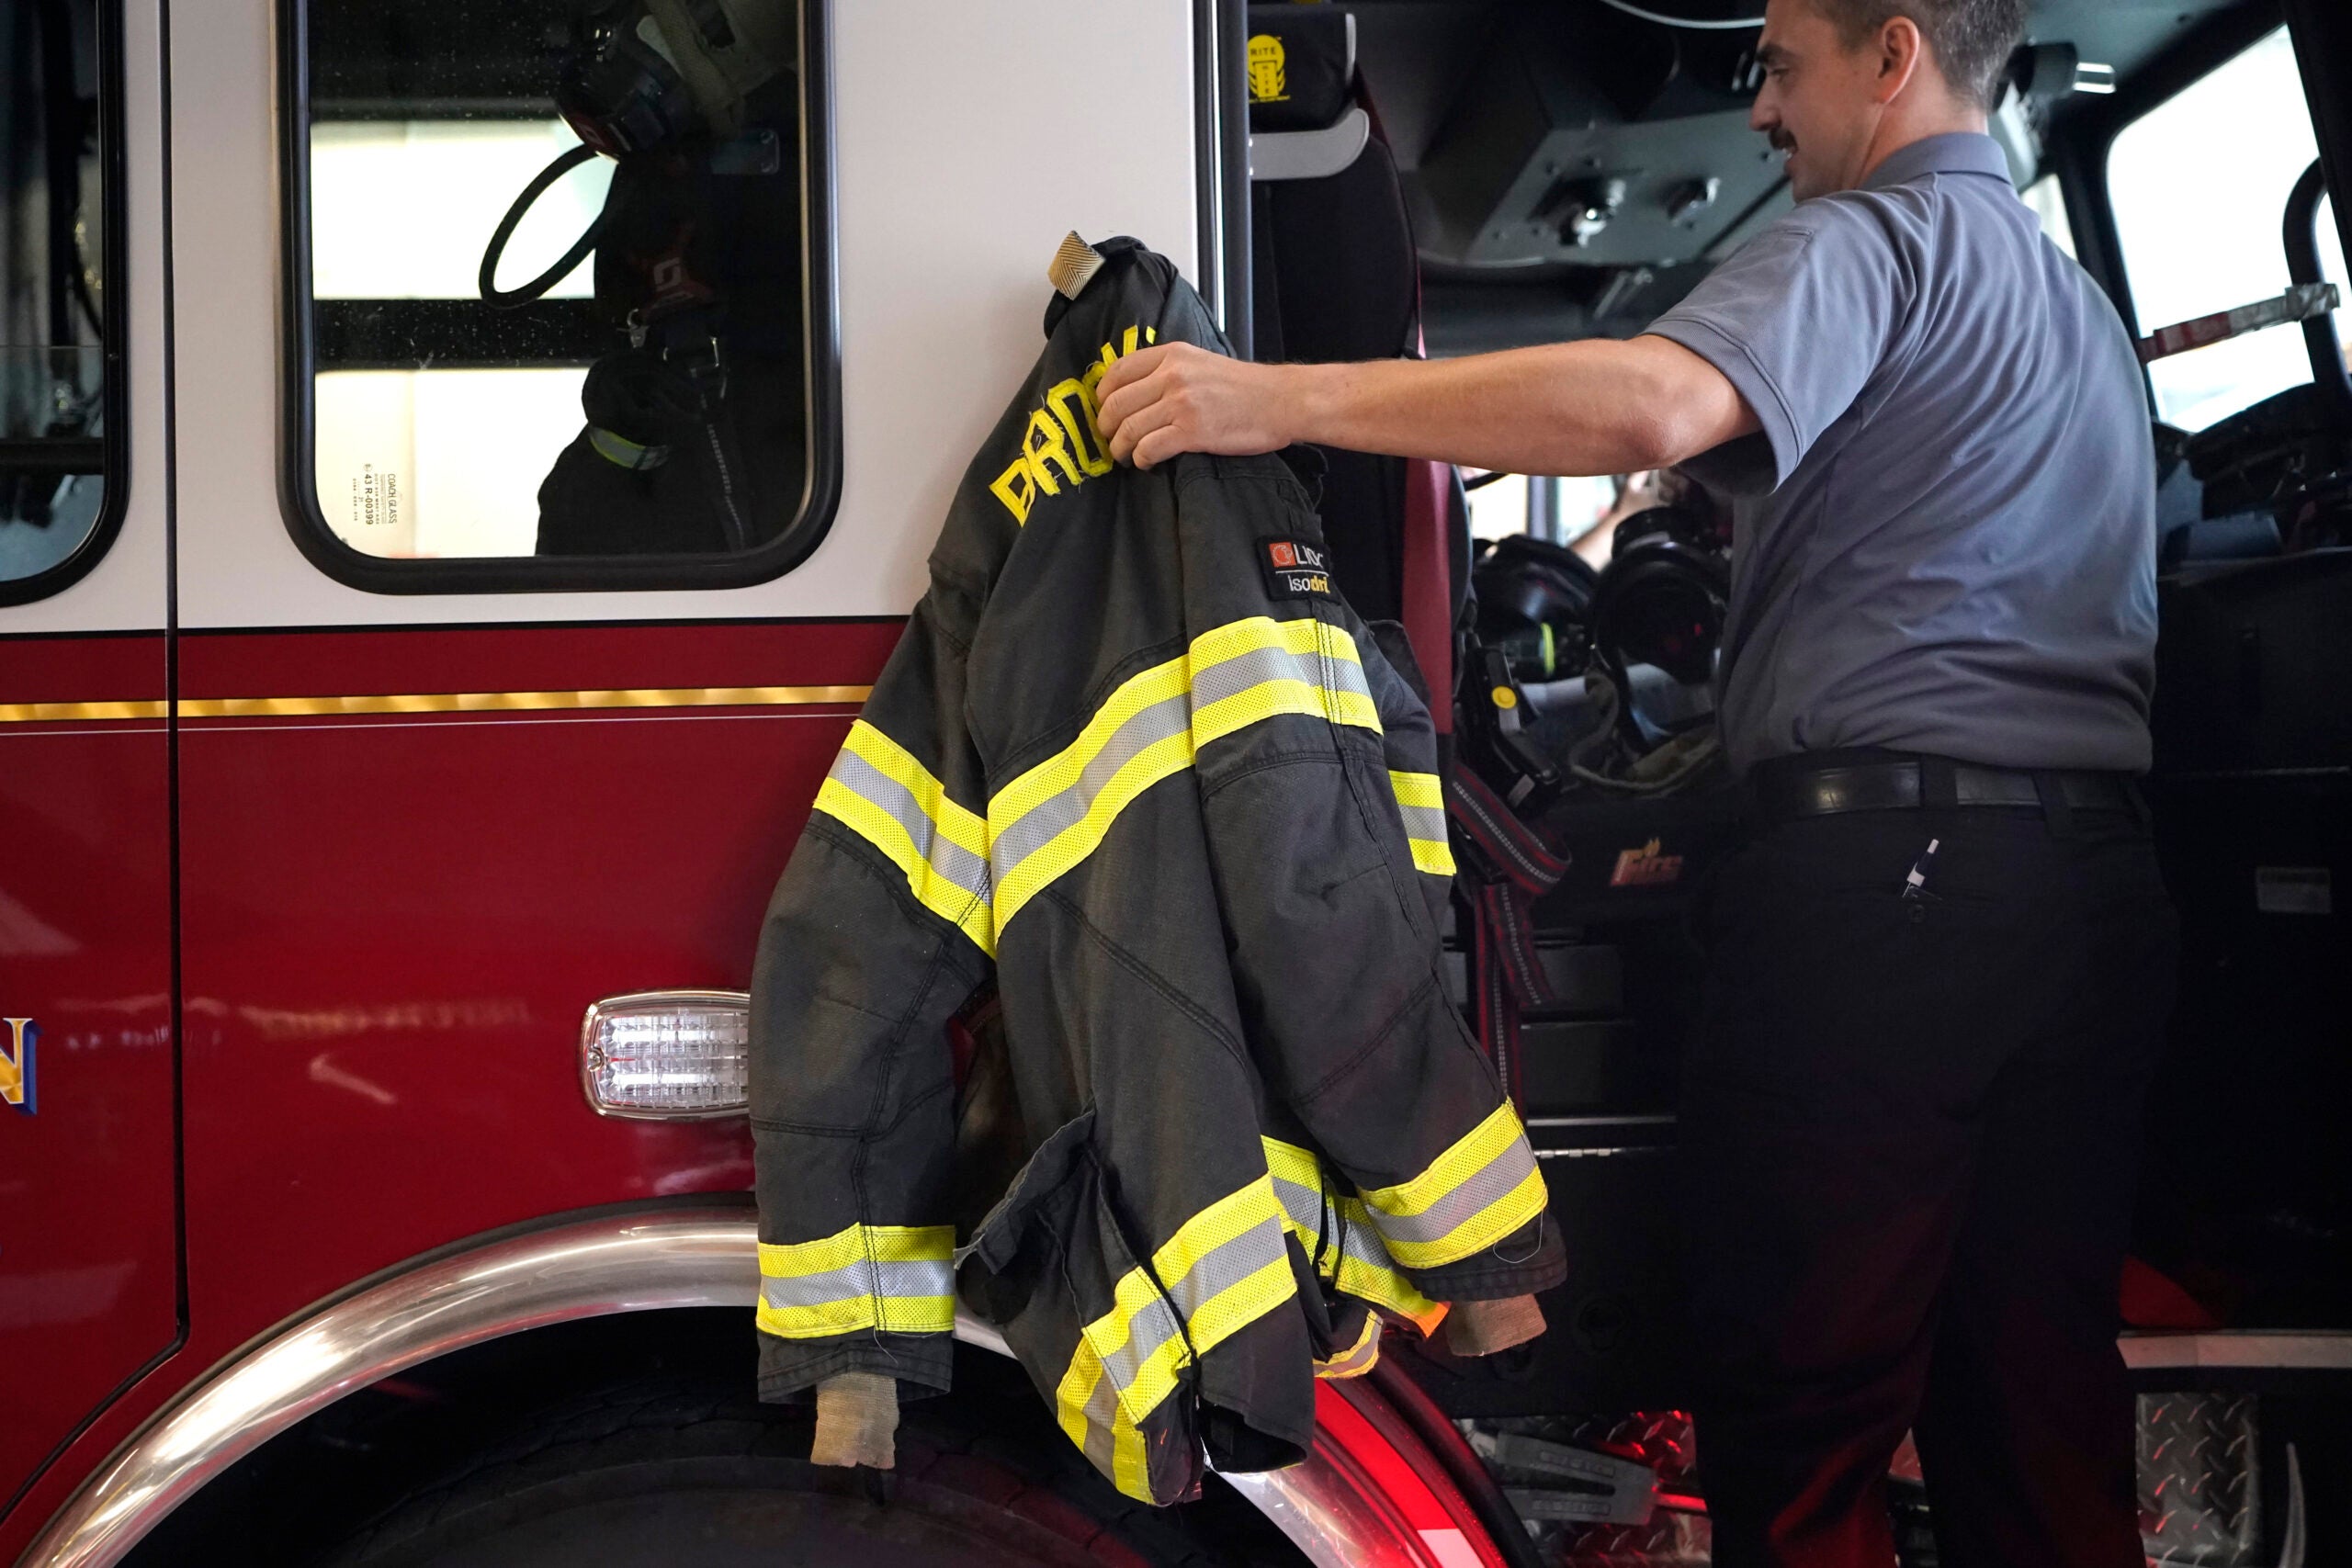 A Brockton firefighter lifts a protective turnout coat onto a firetruck.